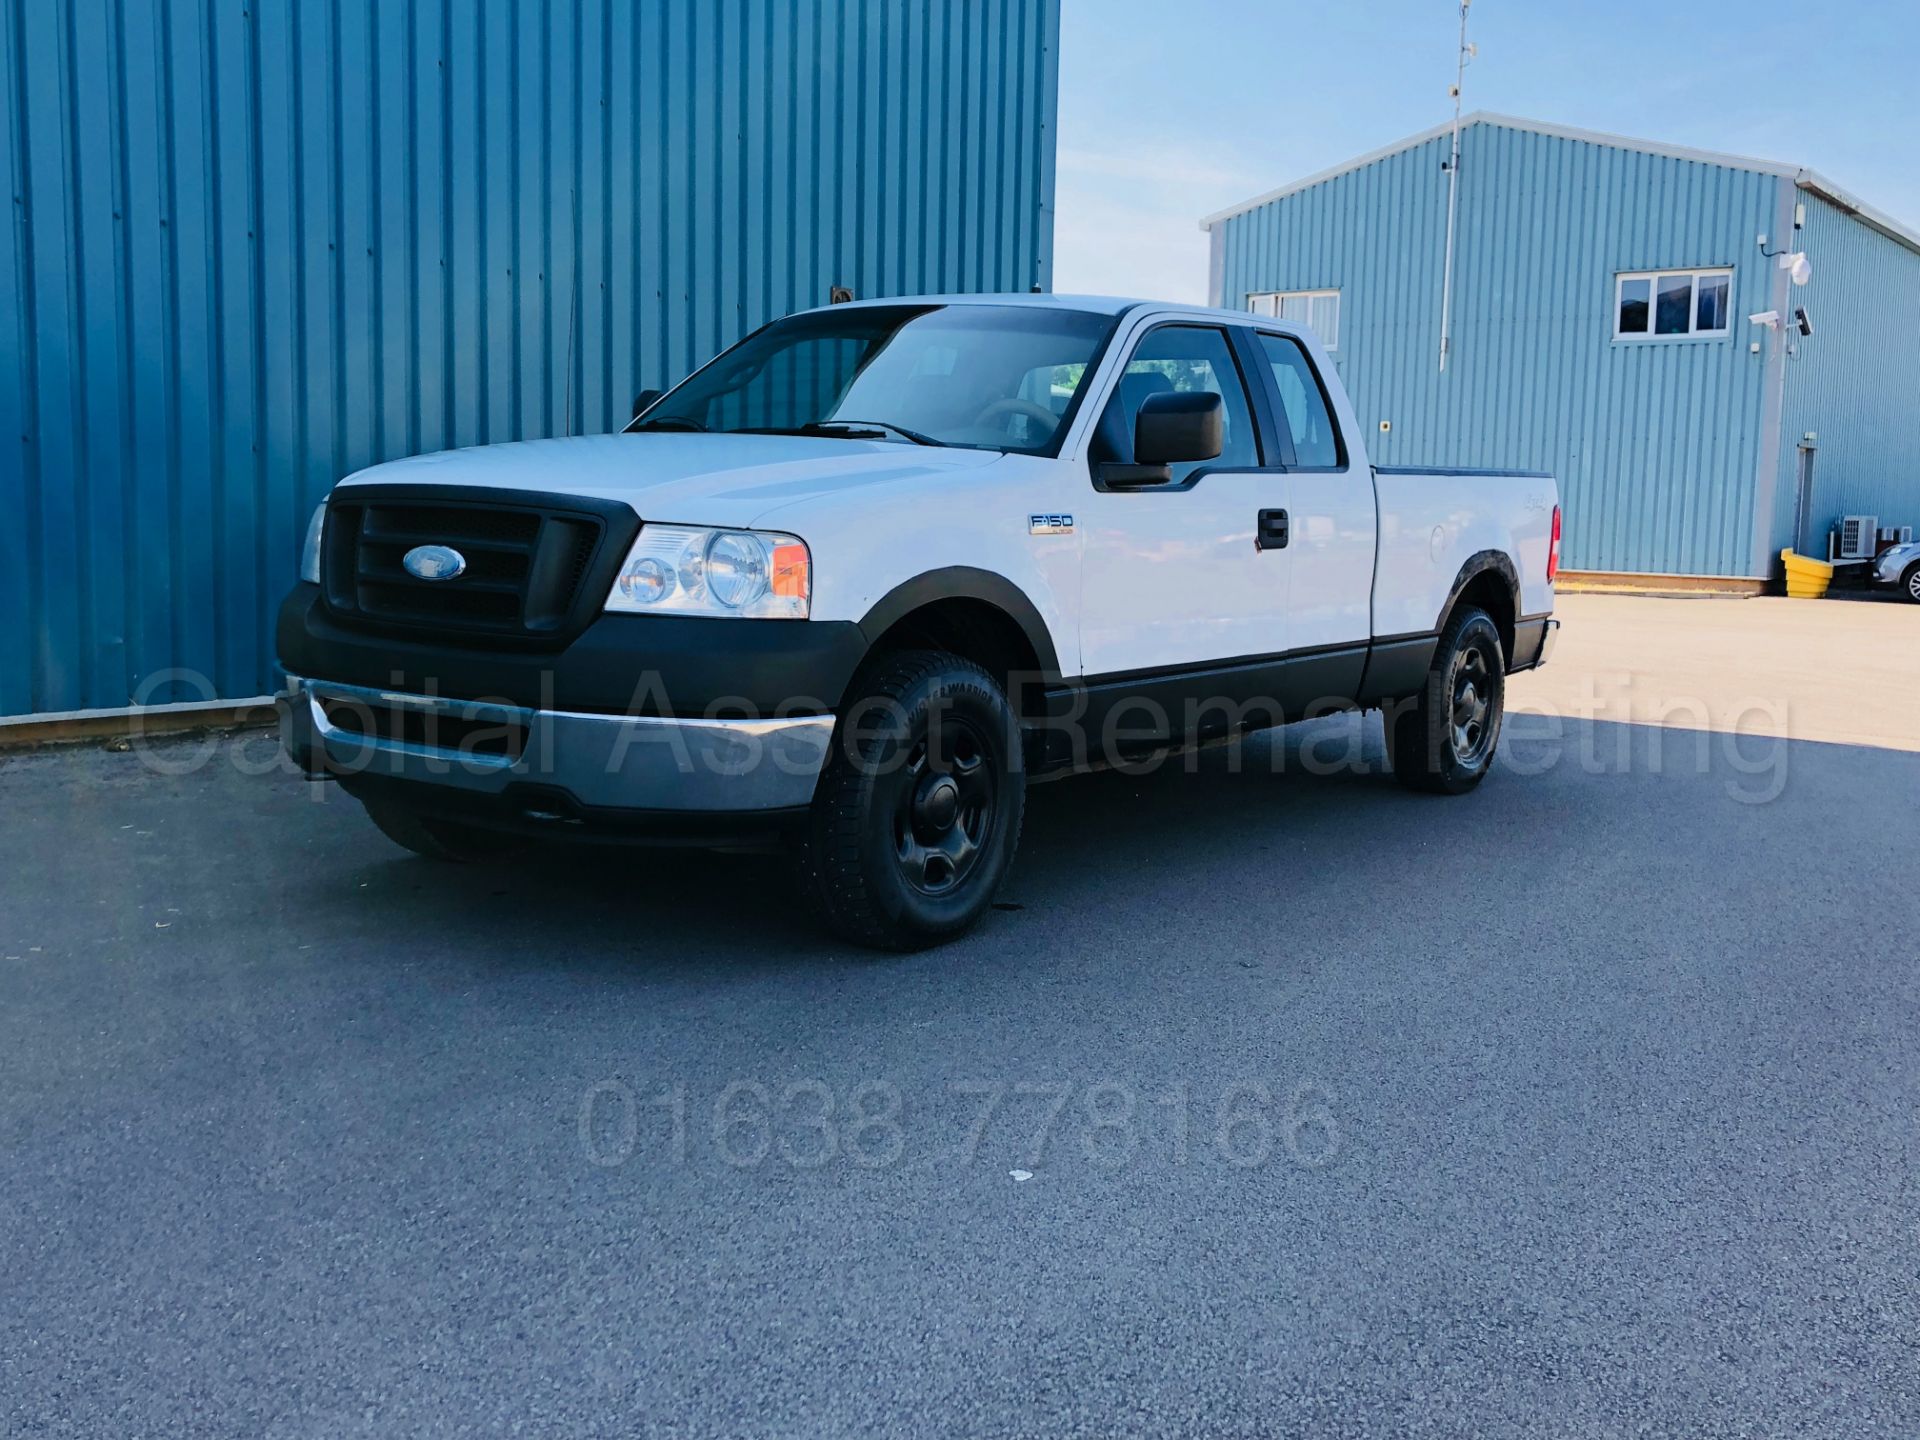 (On Sale) FORD F-150 5.4 TRITON V8 XL EDITION KING-CAB 2008 YEAR**4X4**AUTOMATIC**6 SEATS* - Image 5 of 26